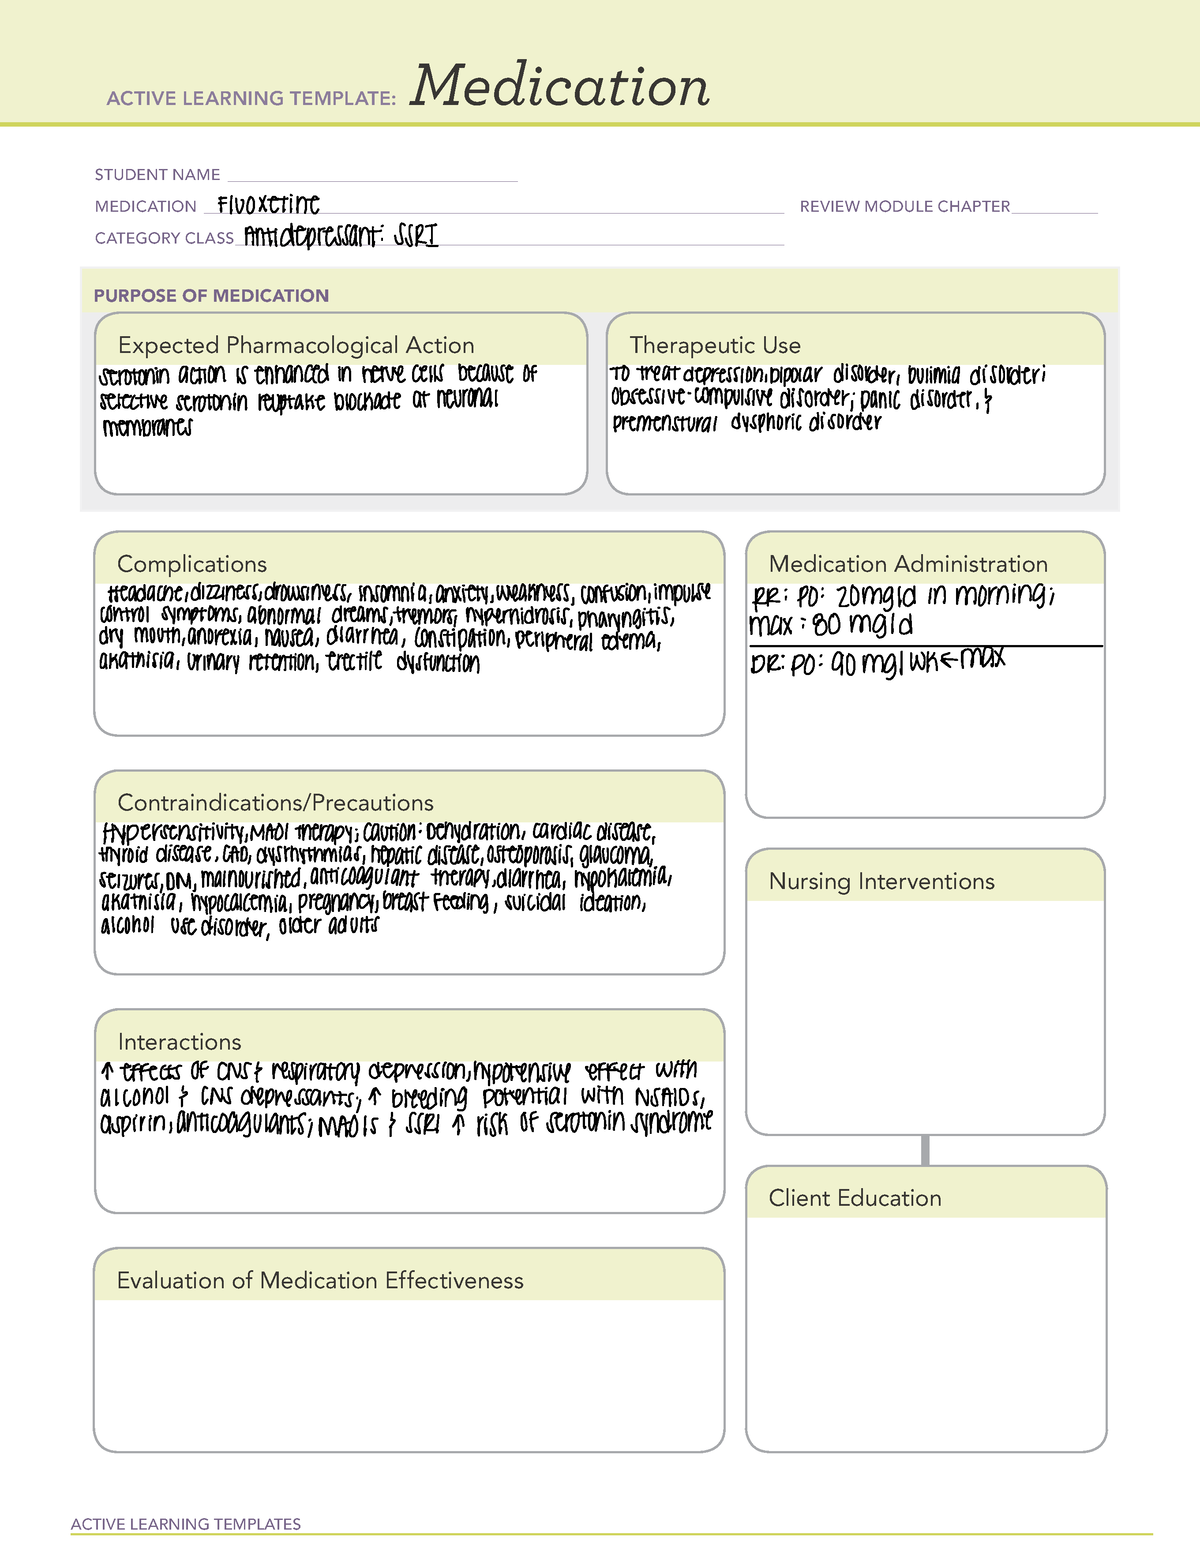 Active Learning Template Fluoxetine ACTIVE LEARNING TEMPLATES